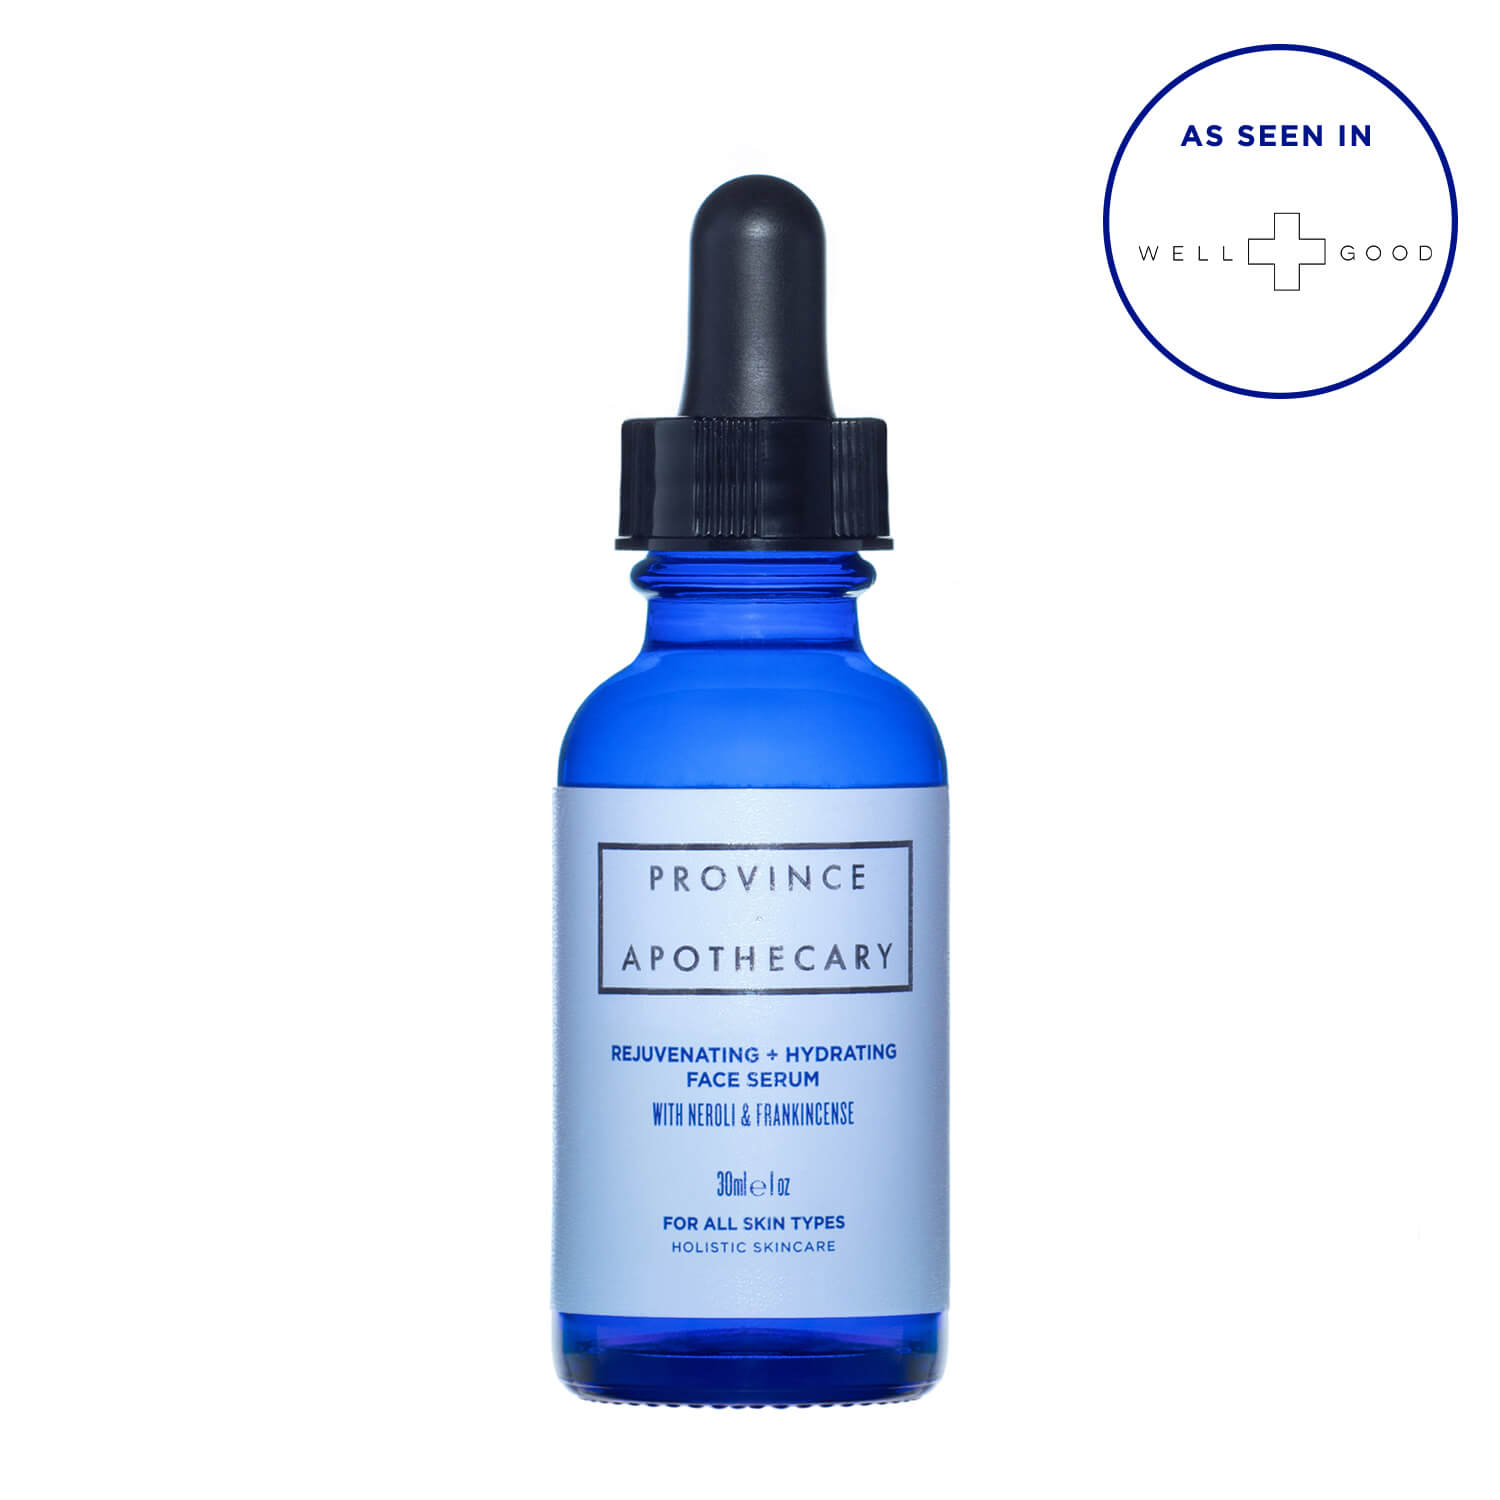 Rejuvenating + Hydrating Face Serum - Province Apothecary